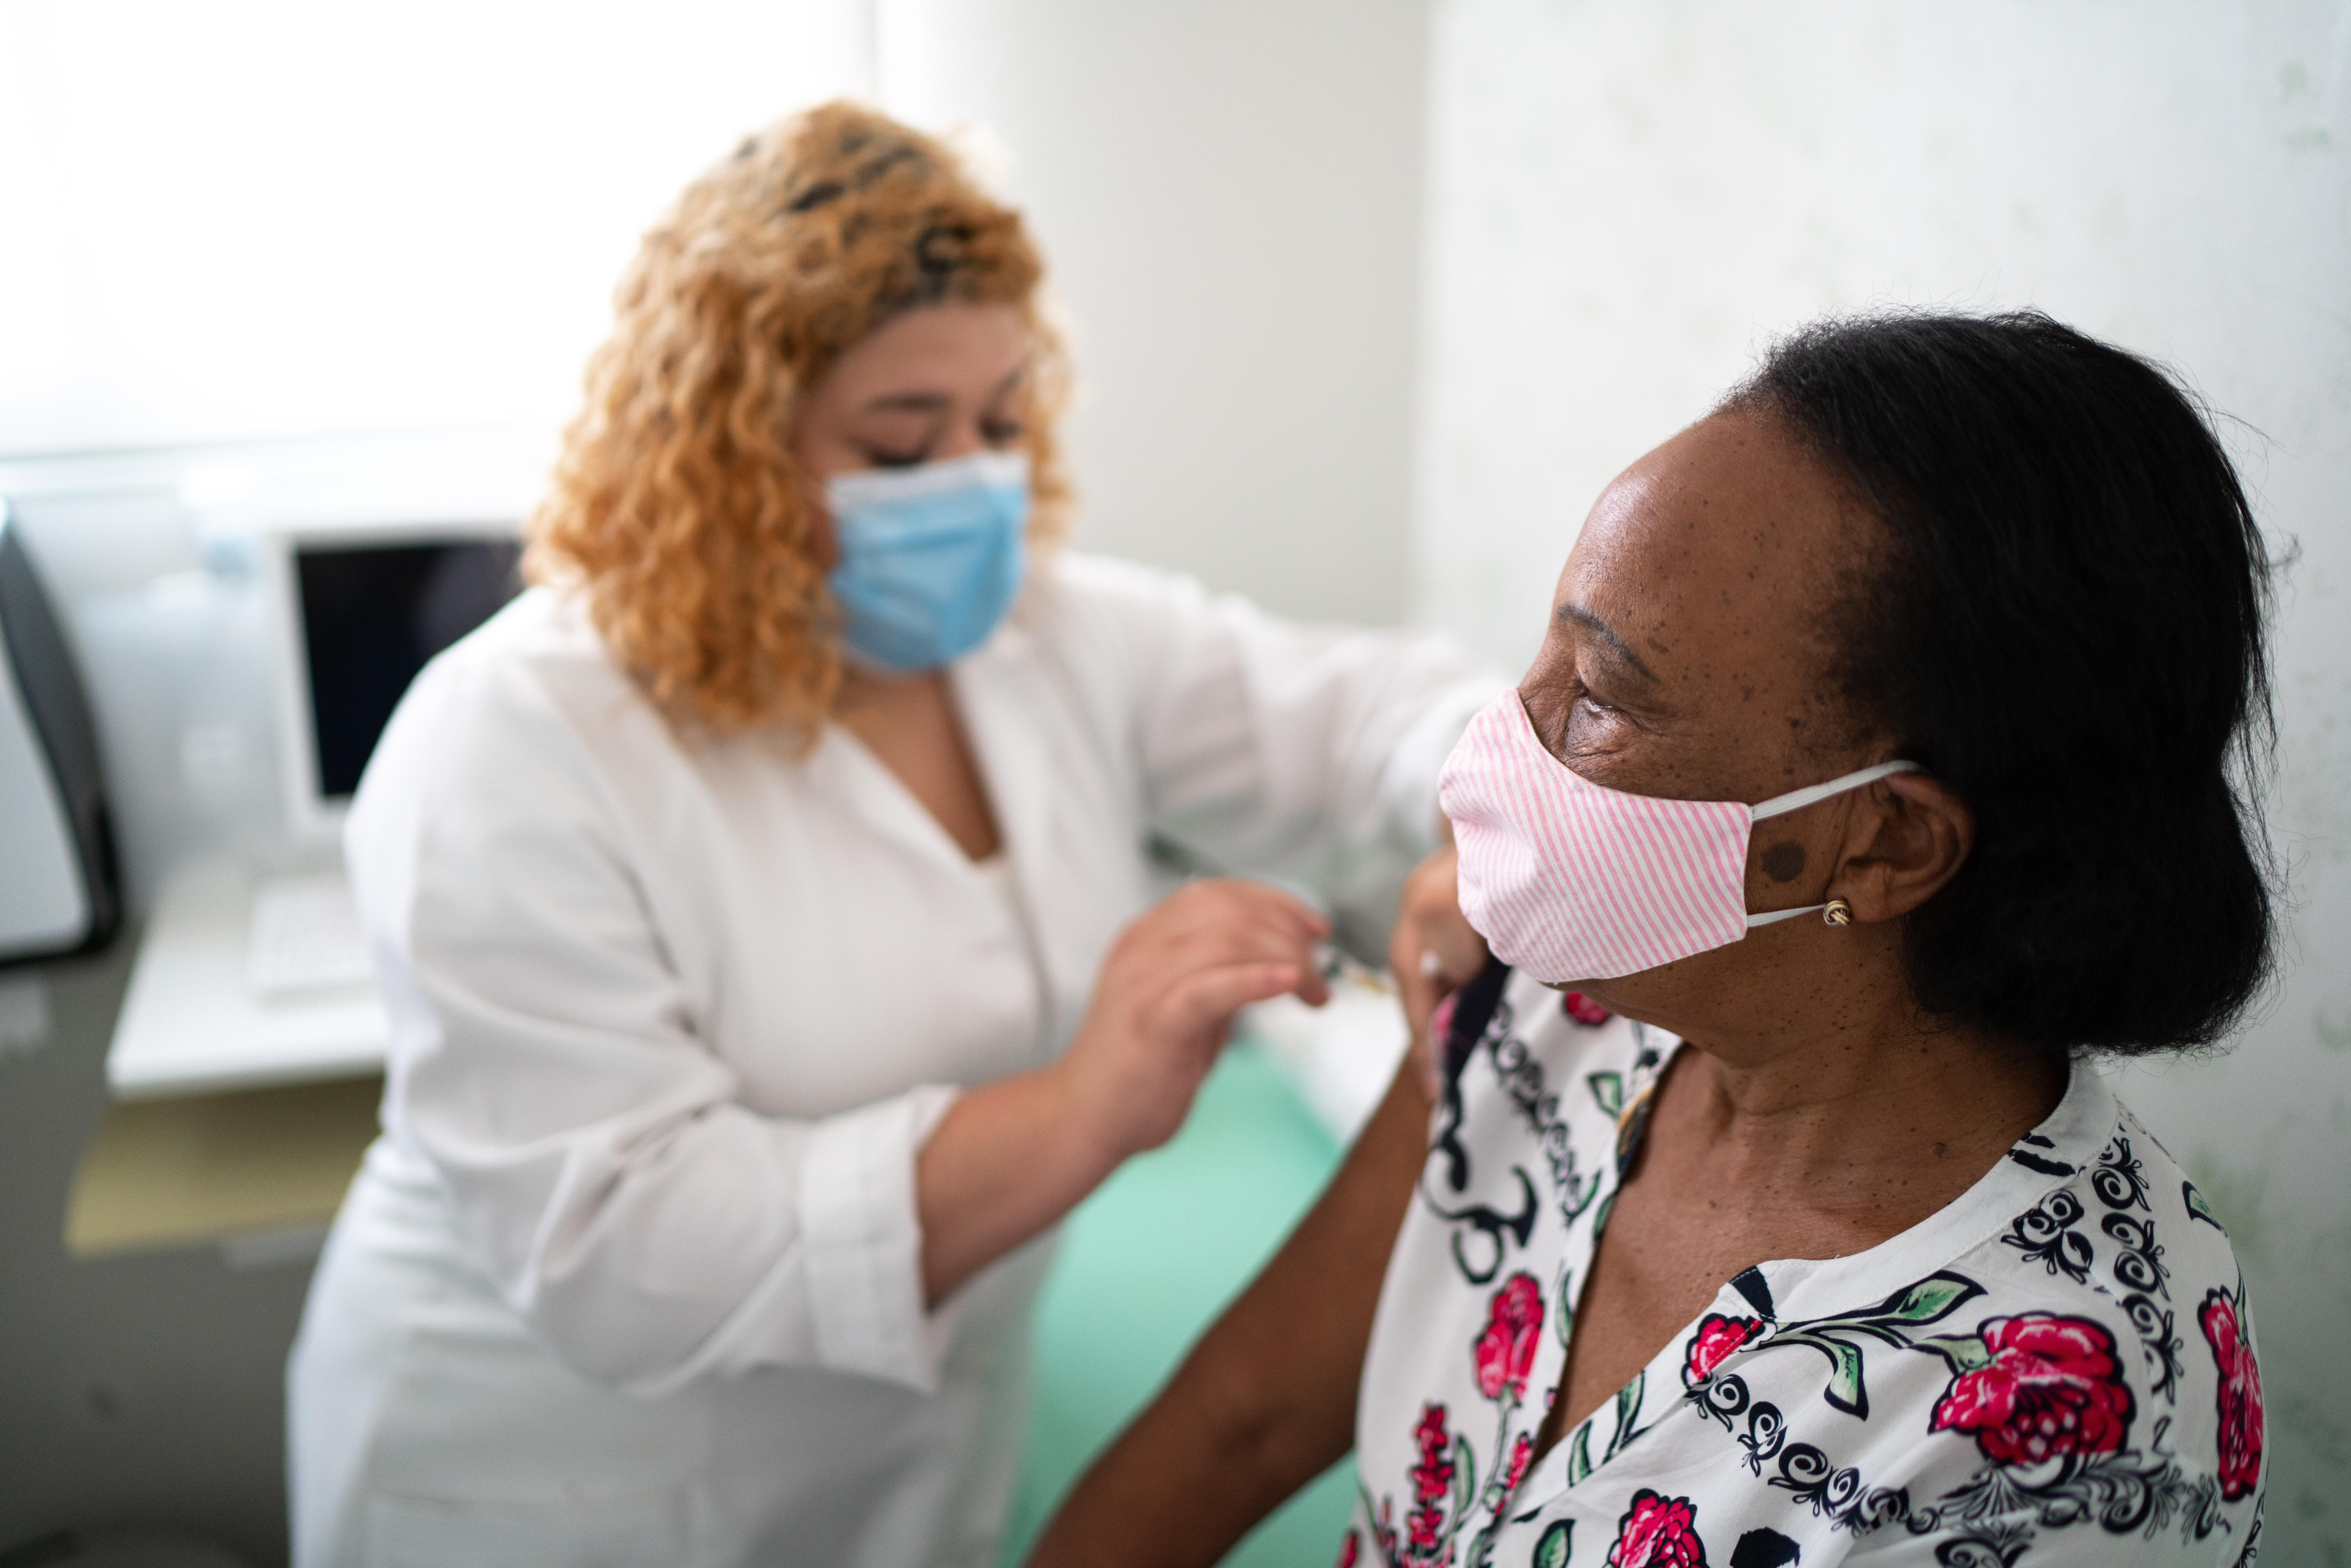 A woman in a mask gets a vaccine from a female health provider in a mask